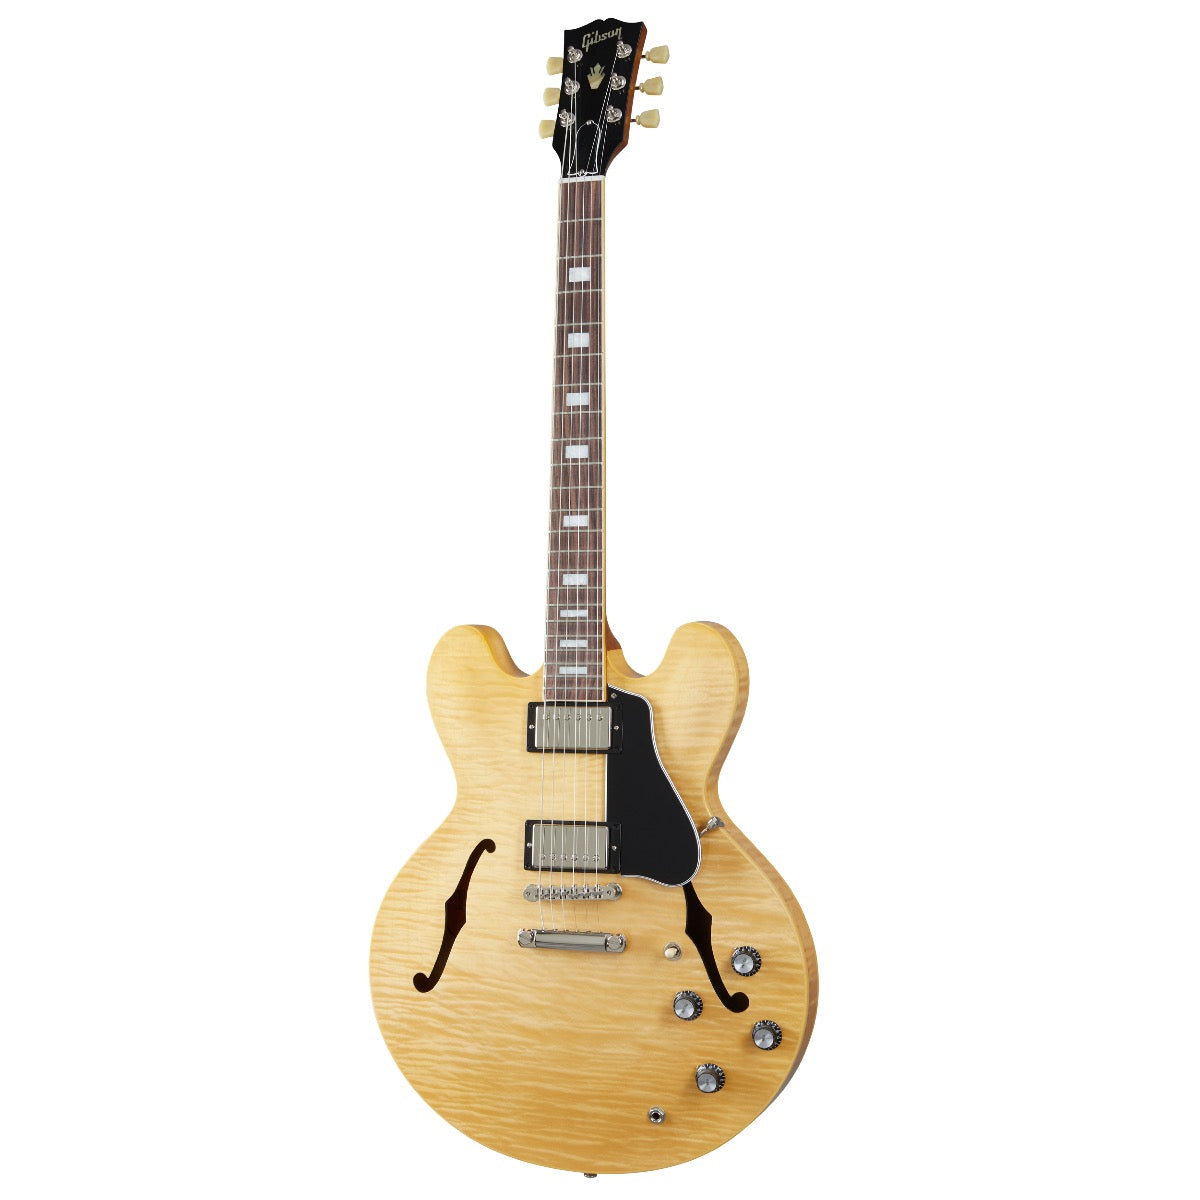 Gibson ES-335 Figured Semi Hollow Electric Guitar - Antique Natural